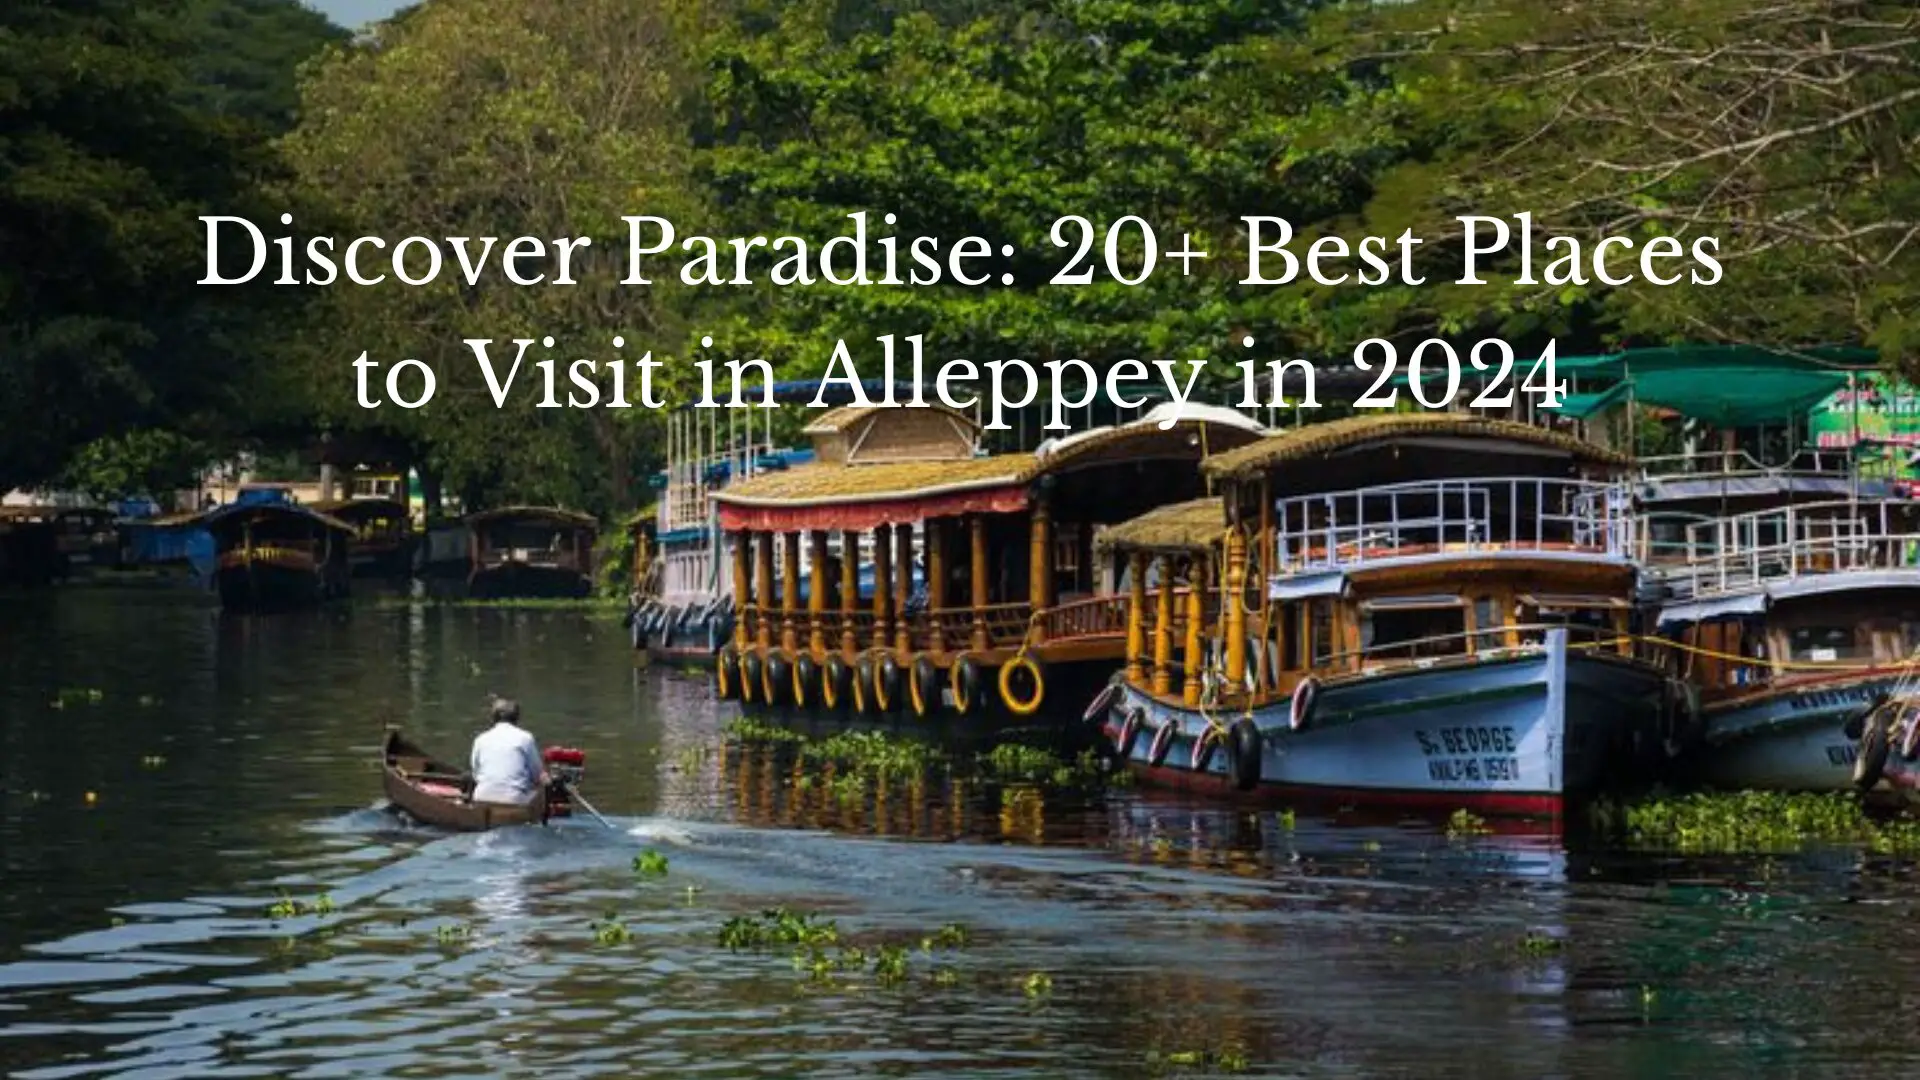 Discover Paradise: 20+ Best Places to Visit in Alleppey in 2024